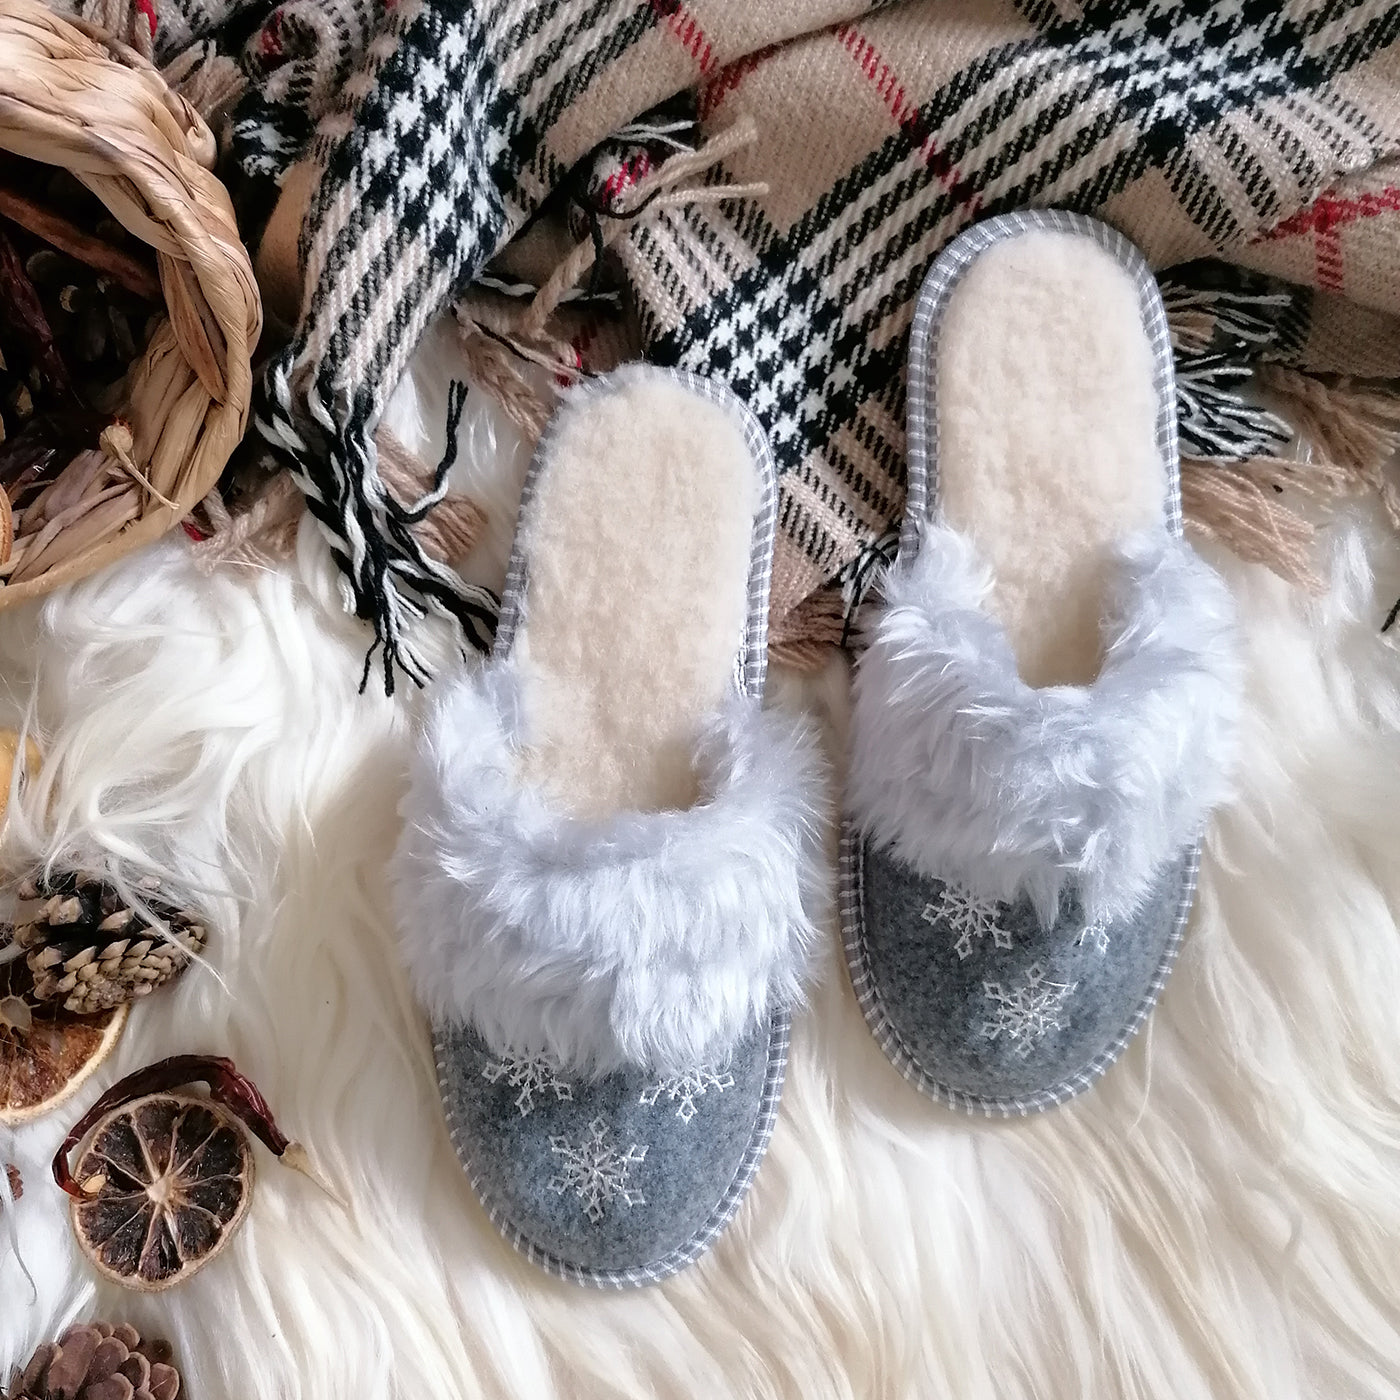 Warm Felt Slippers with Sheep Wool SNOW